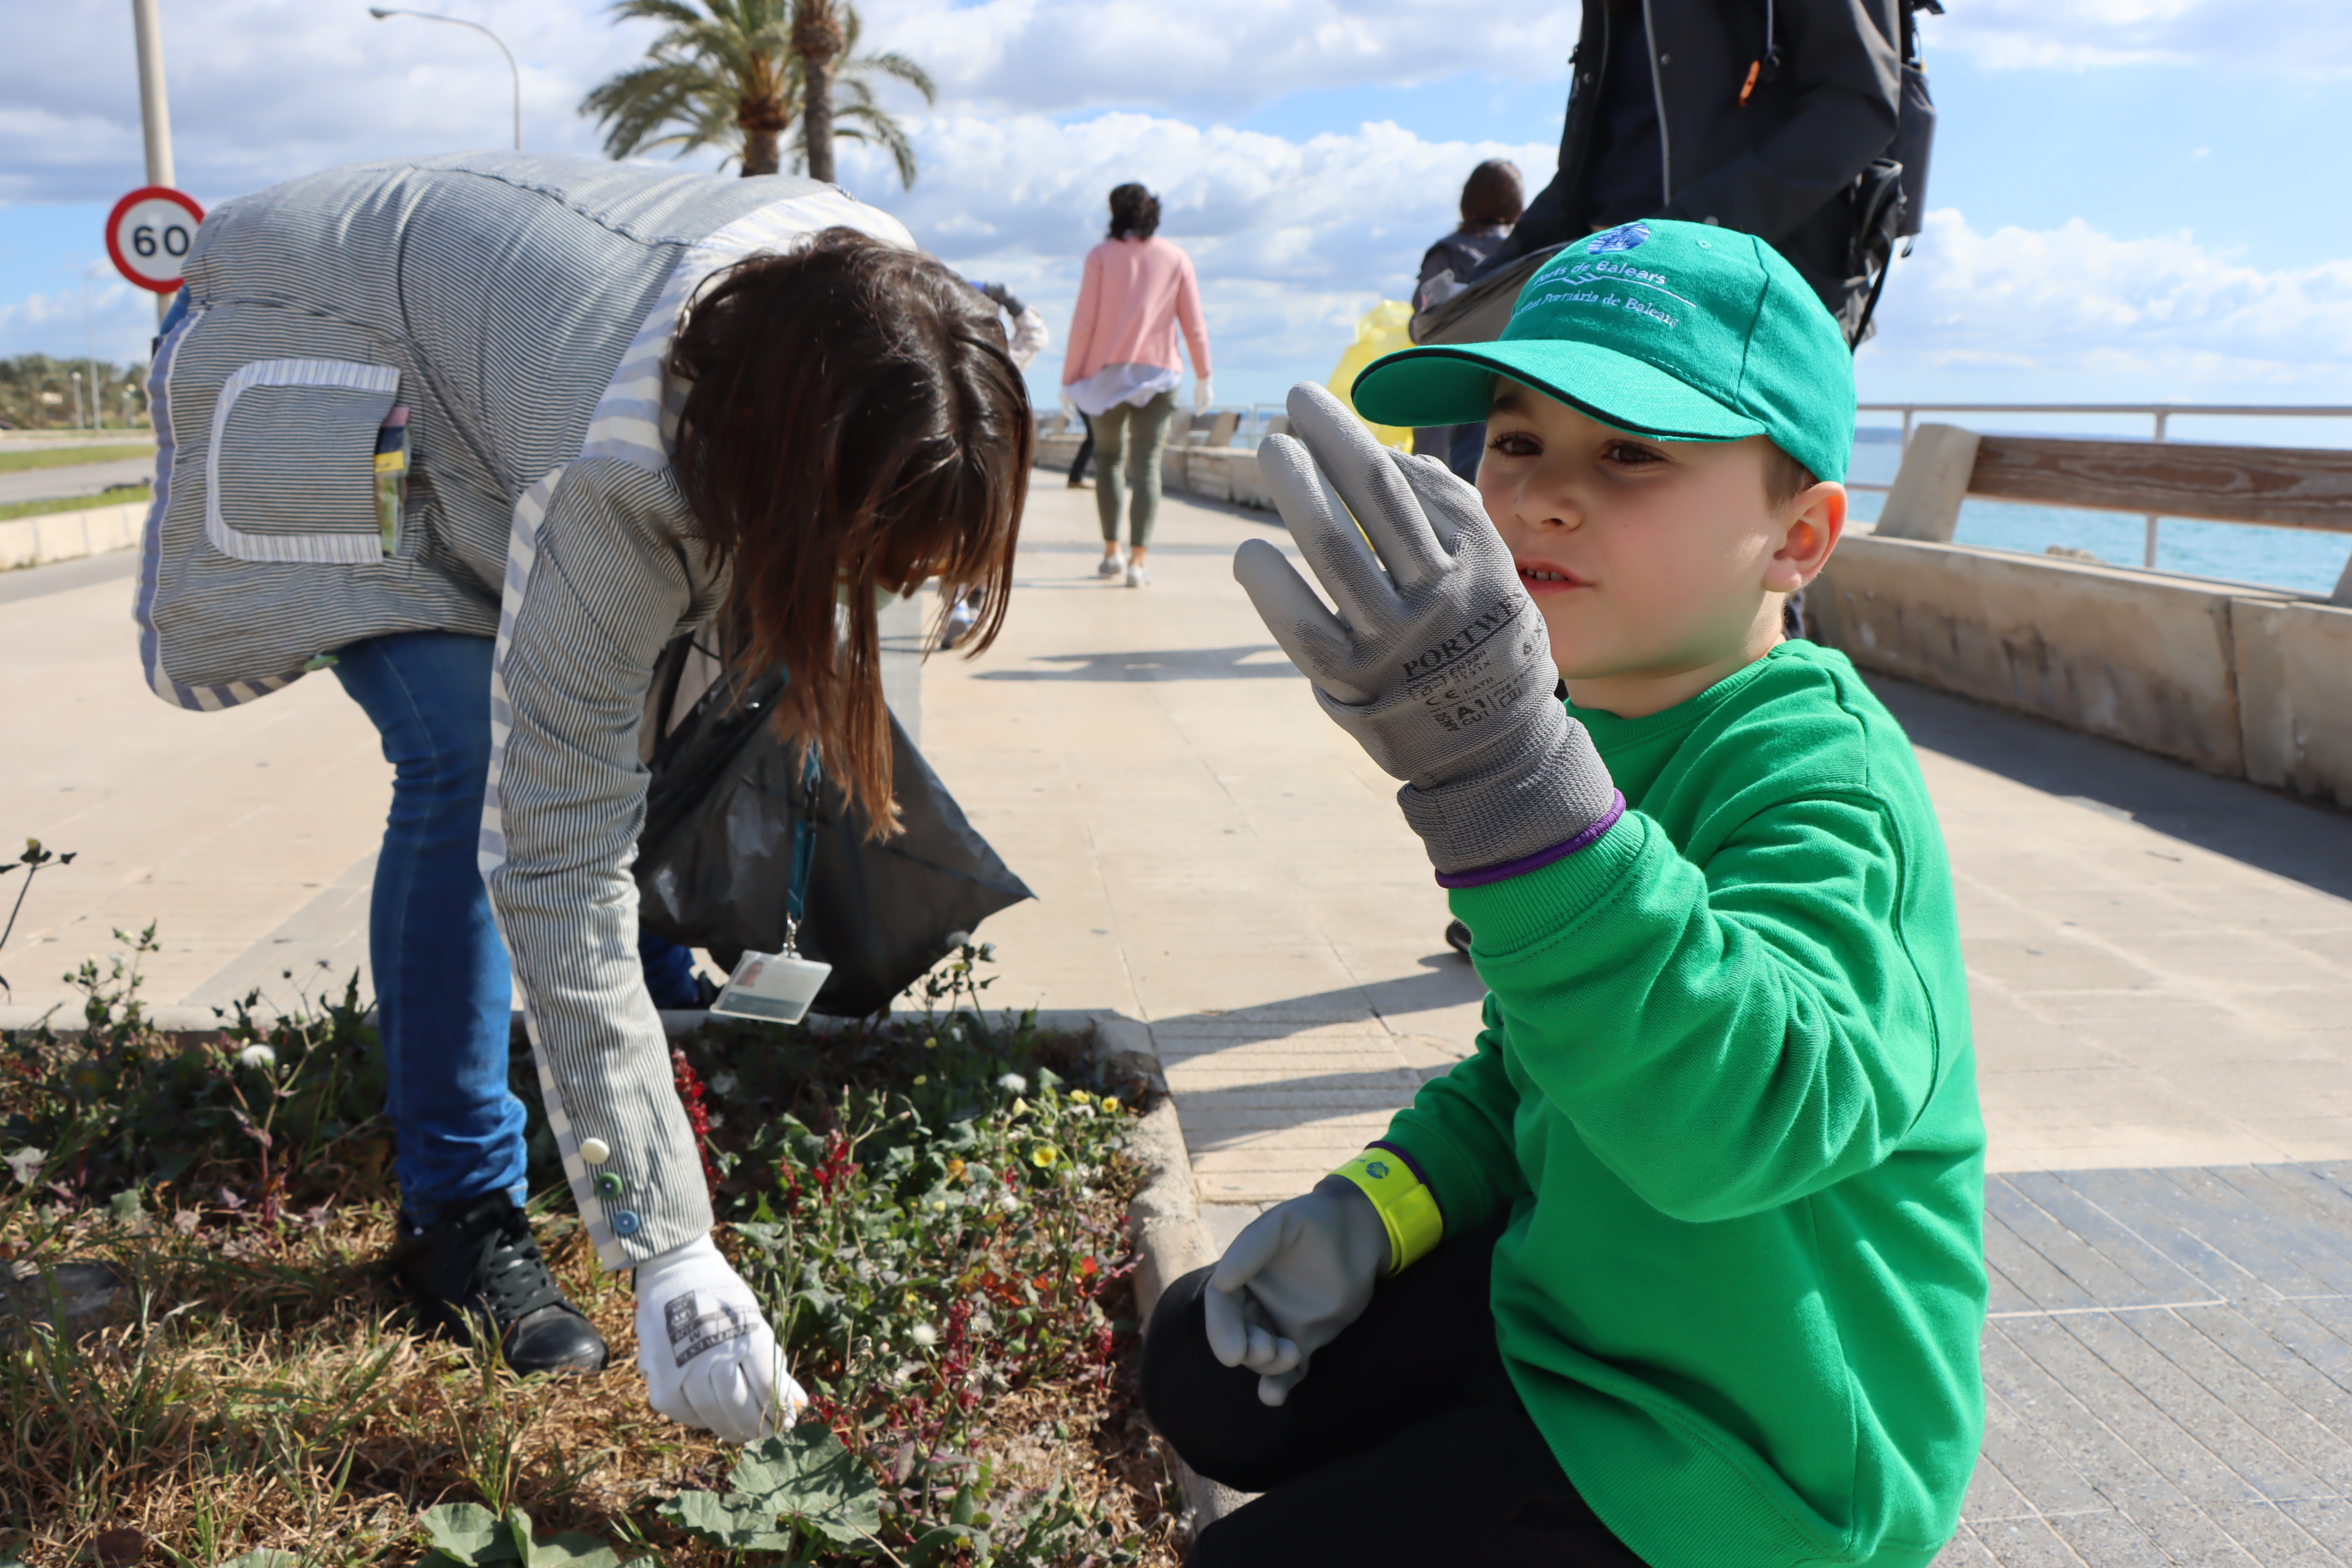 APB staff and their families participate in the collection of plastic waste on Can Pere Antoni beach in Palma